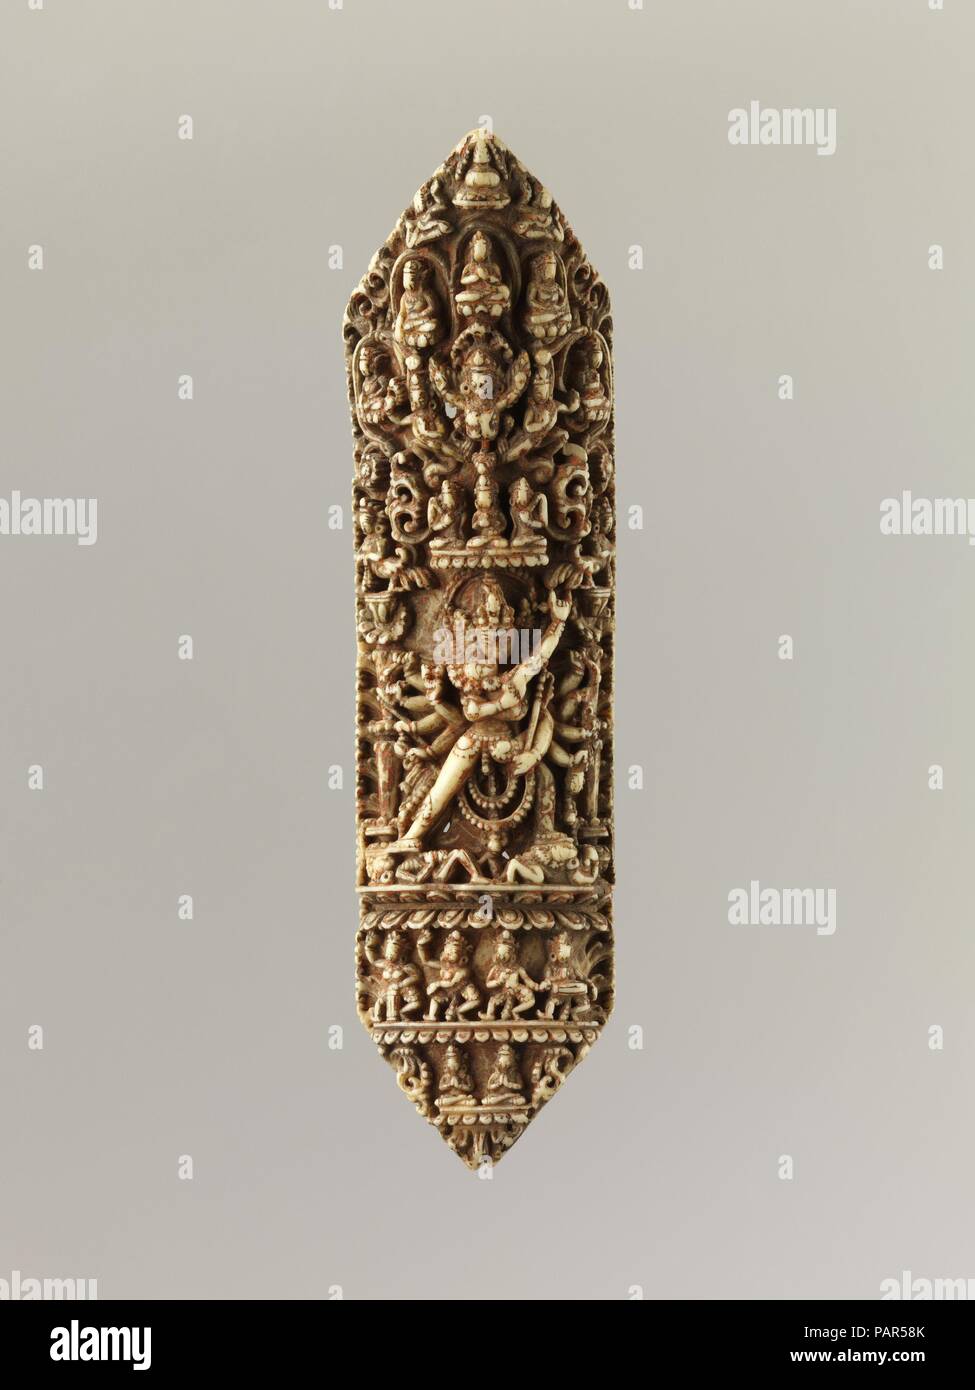 Plaque from a Tantric Ritual Apron (Chakrasamvara and Vajravarahi at Center). Culture: Nepal. Dimensions: H. 6 9/16 in. (16.7 cm). Date: 16th century or later. Museum: Metropolitan Museum of Art, New York, USA. Stock Photo